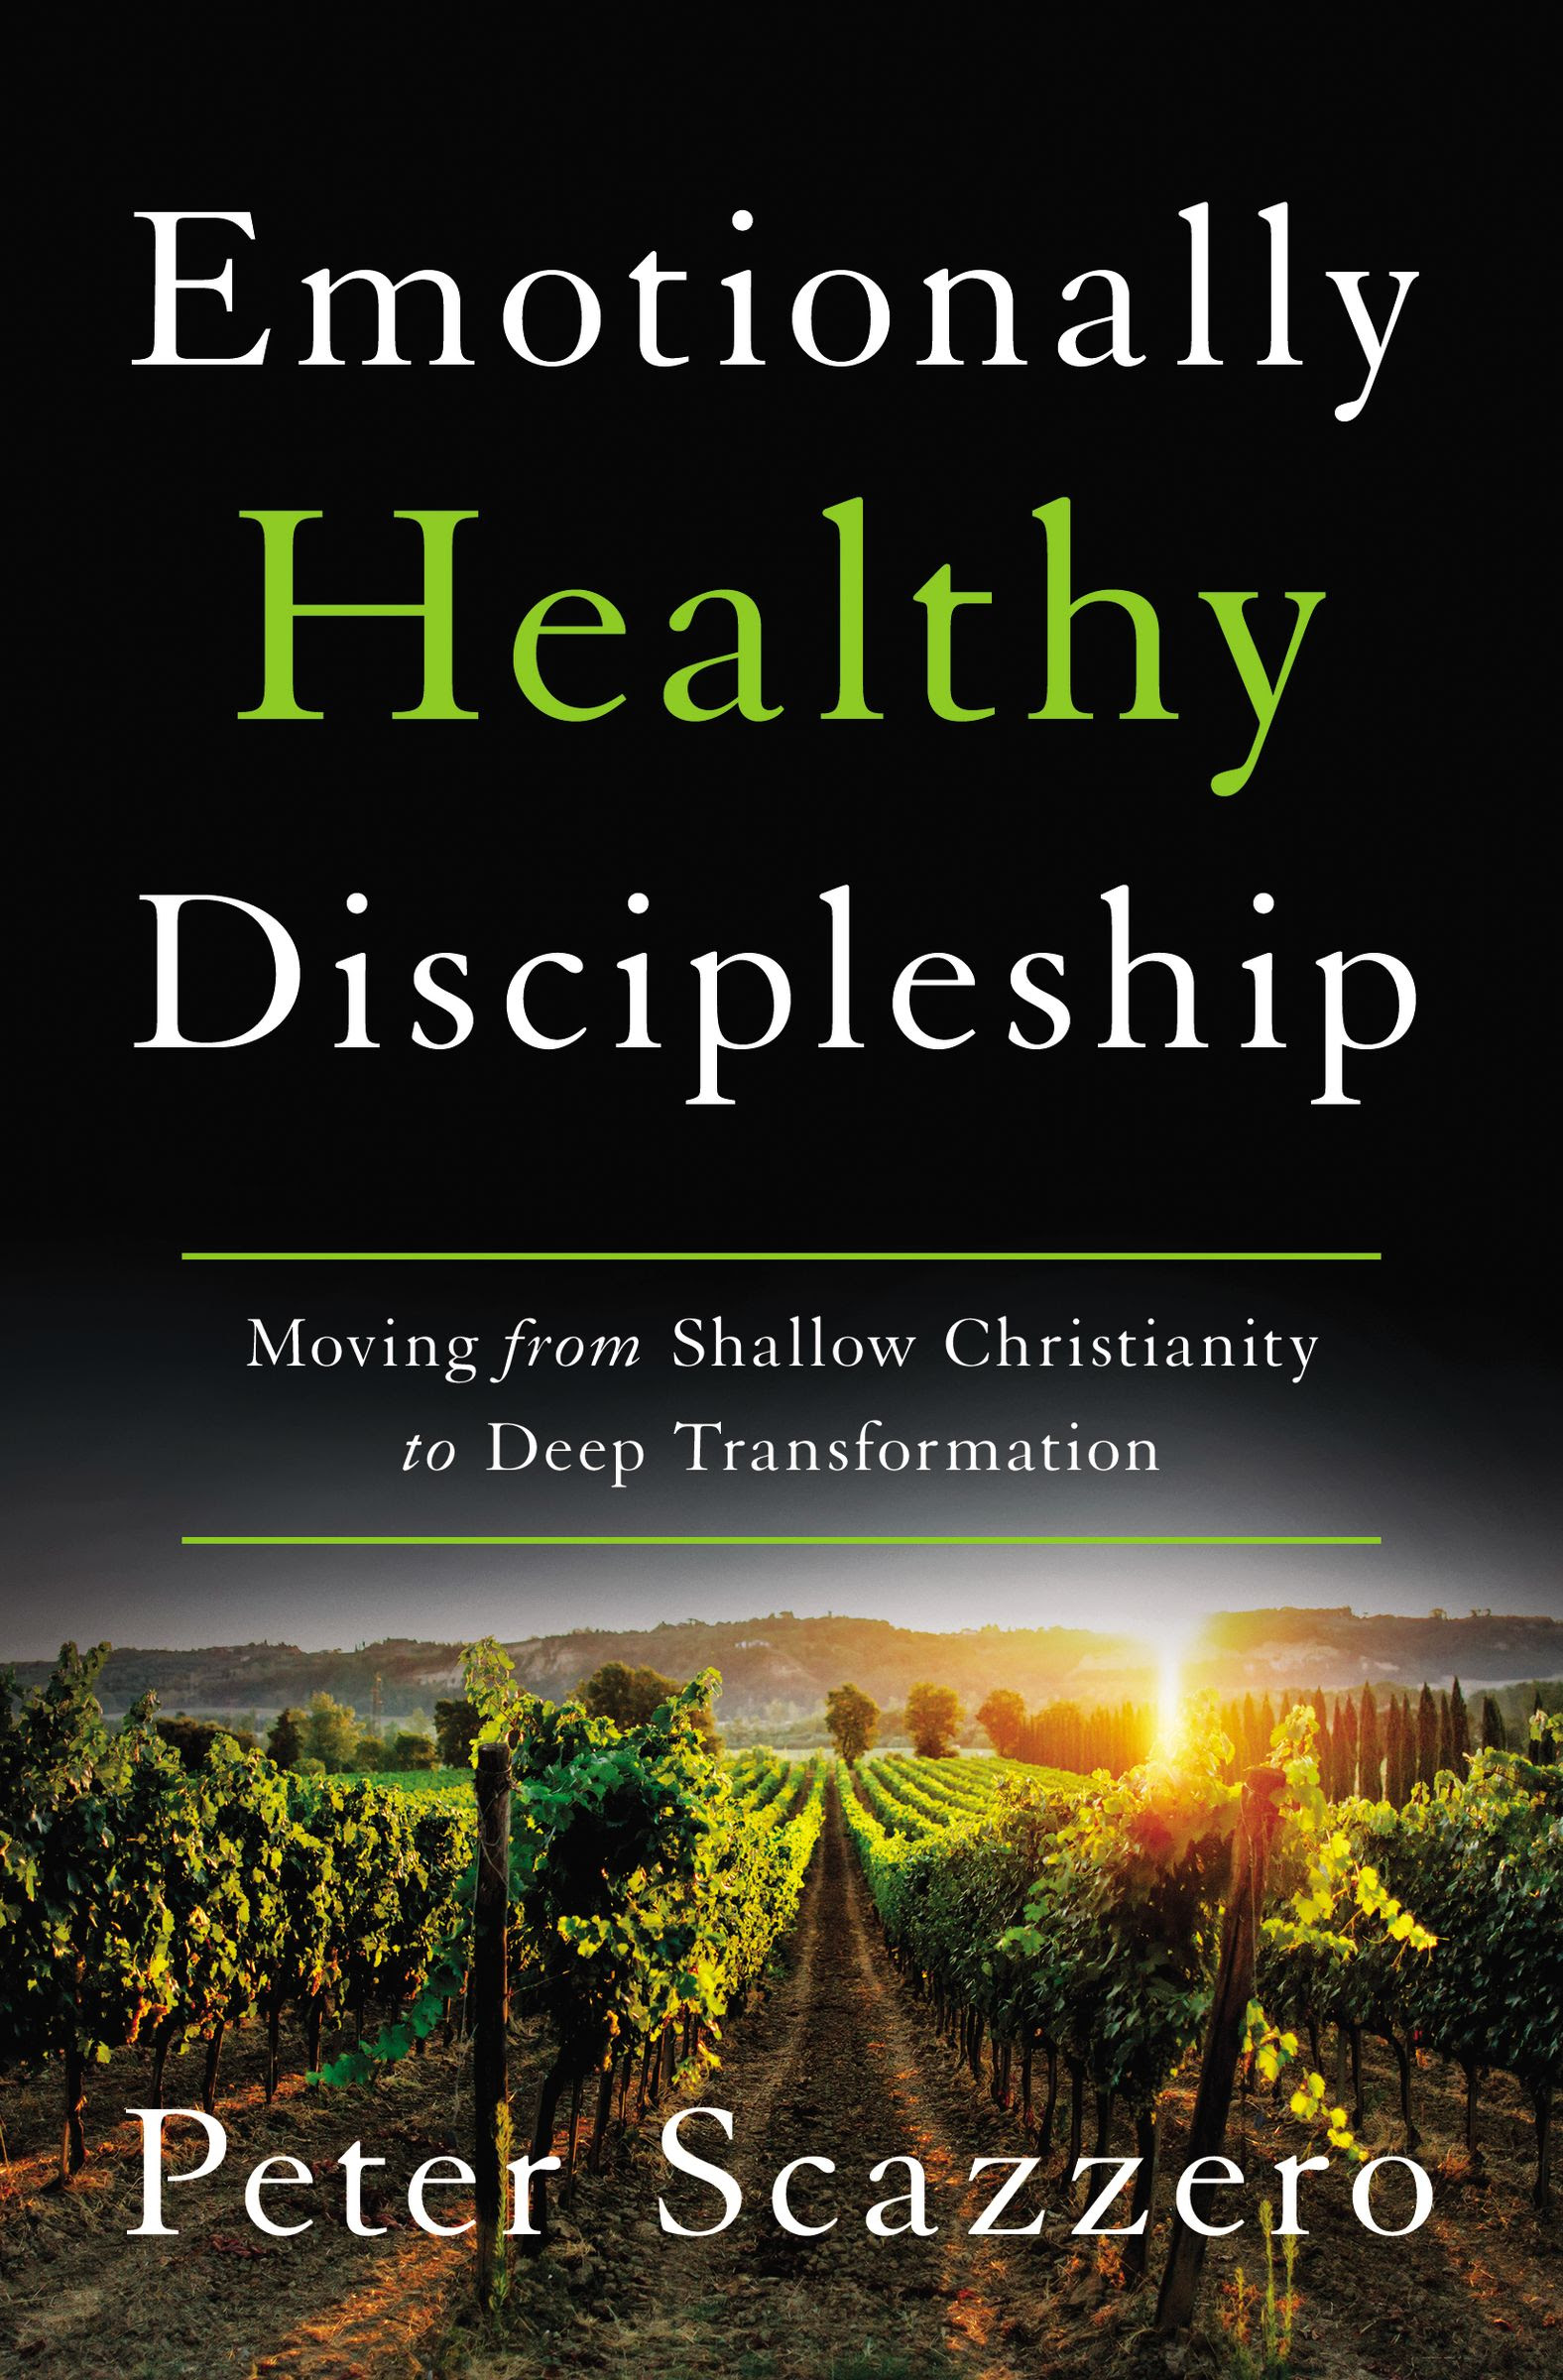 Emotionally Healthy Discipleship: Moving from Shallow Christianity to Deep Transformation PDF